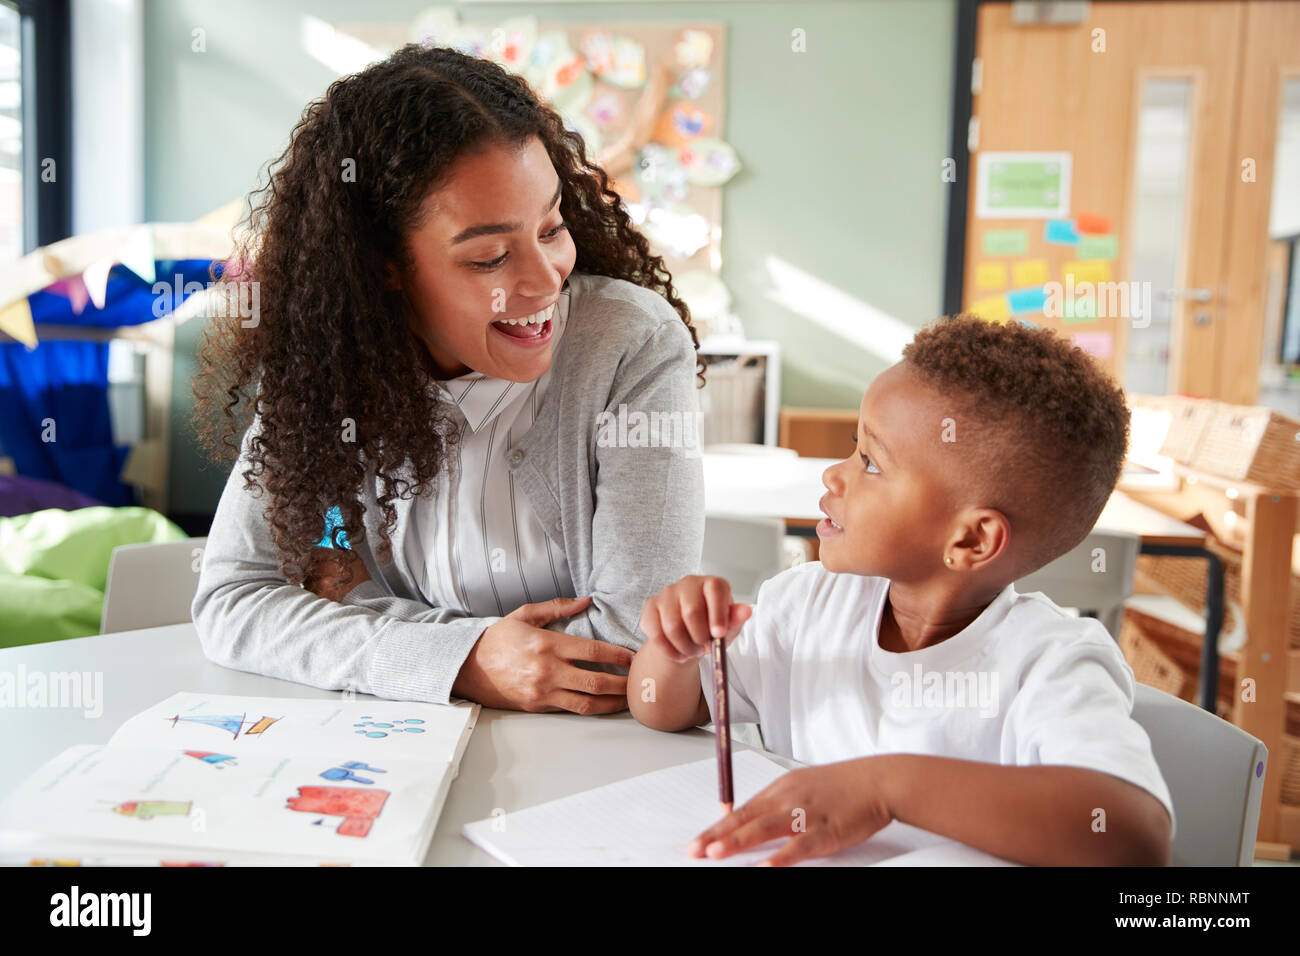 Female infant school teacher working one on one with a young schoolboy, sitting at a table smiling at each other, close up Stock Photo